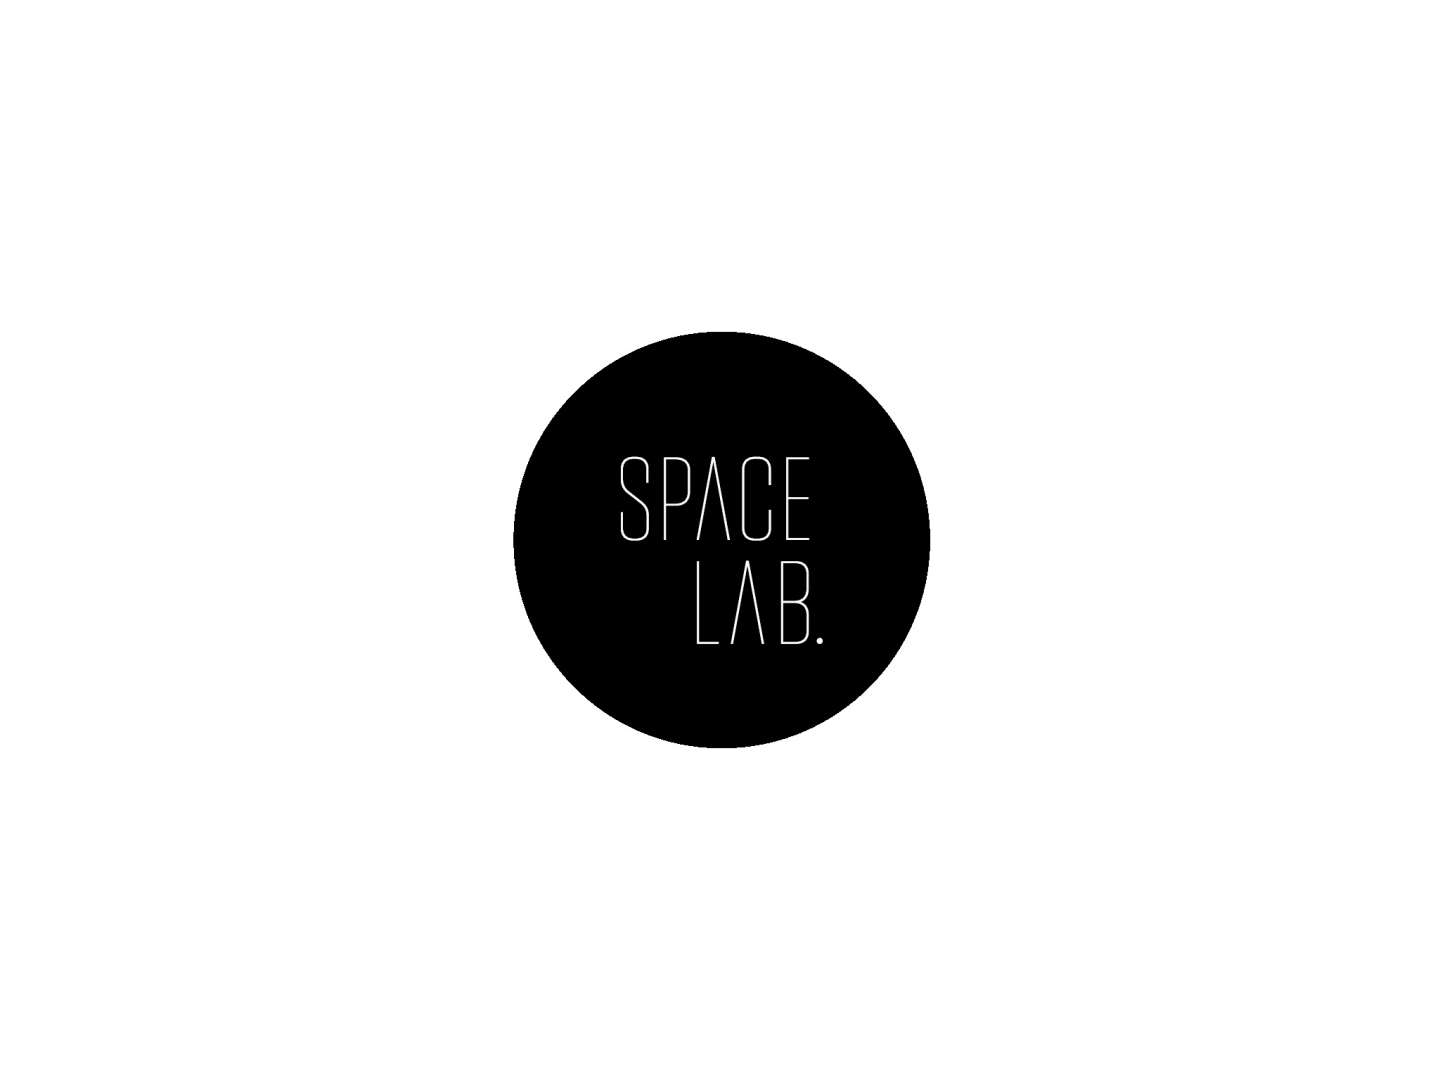 Space Lab.